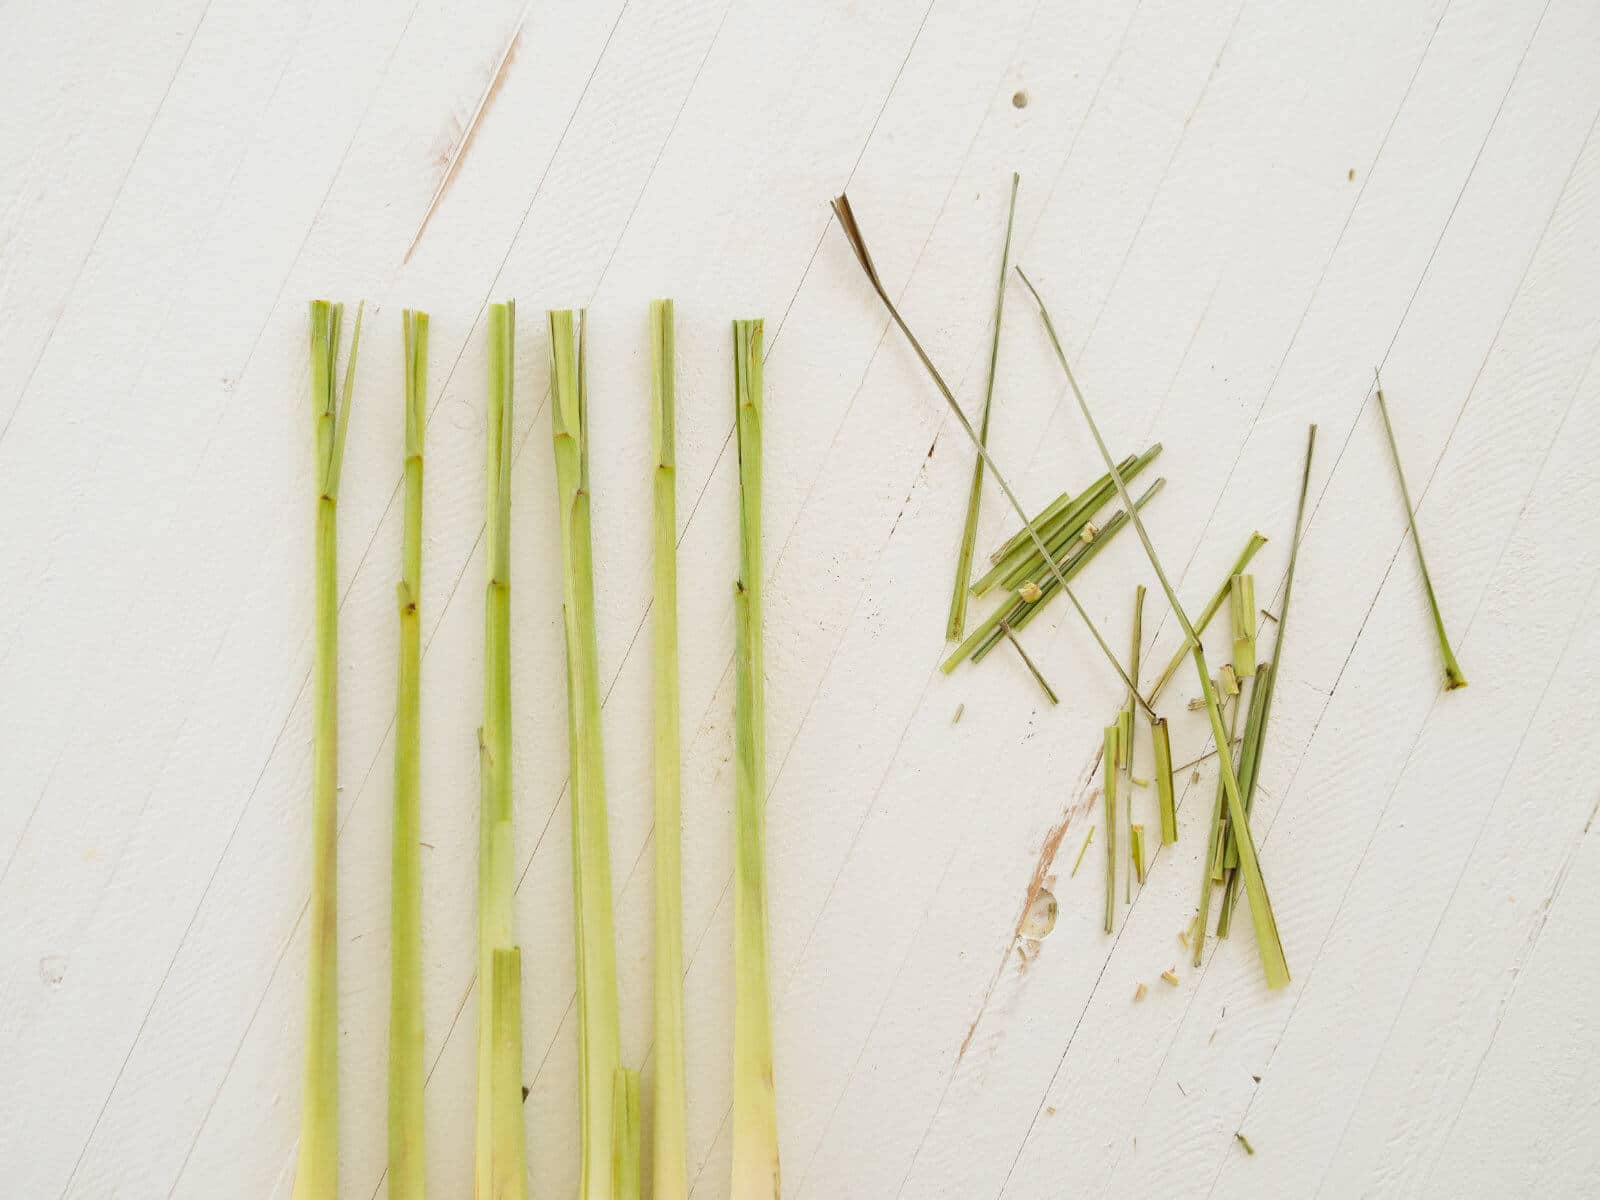 Cut off the tops of the lemongrass to remove any brown or older leaves